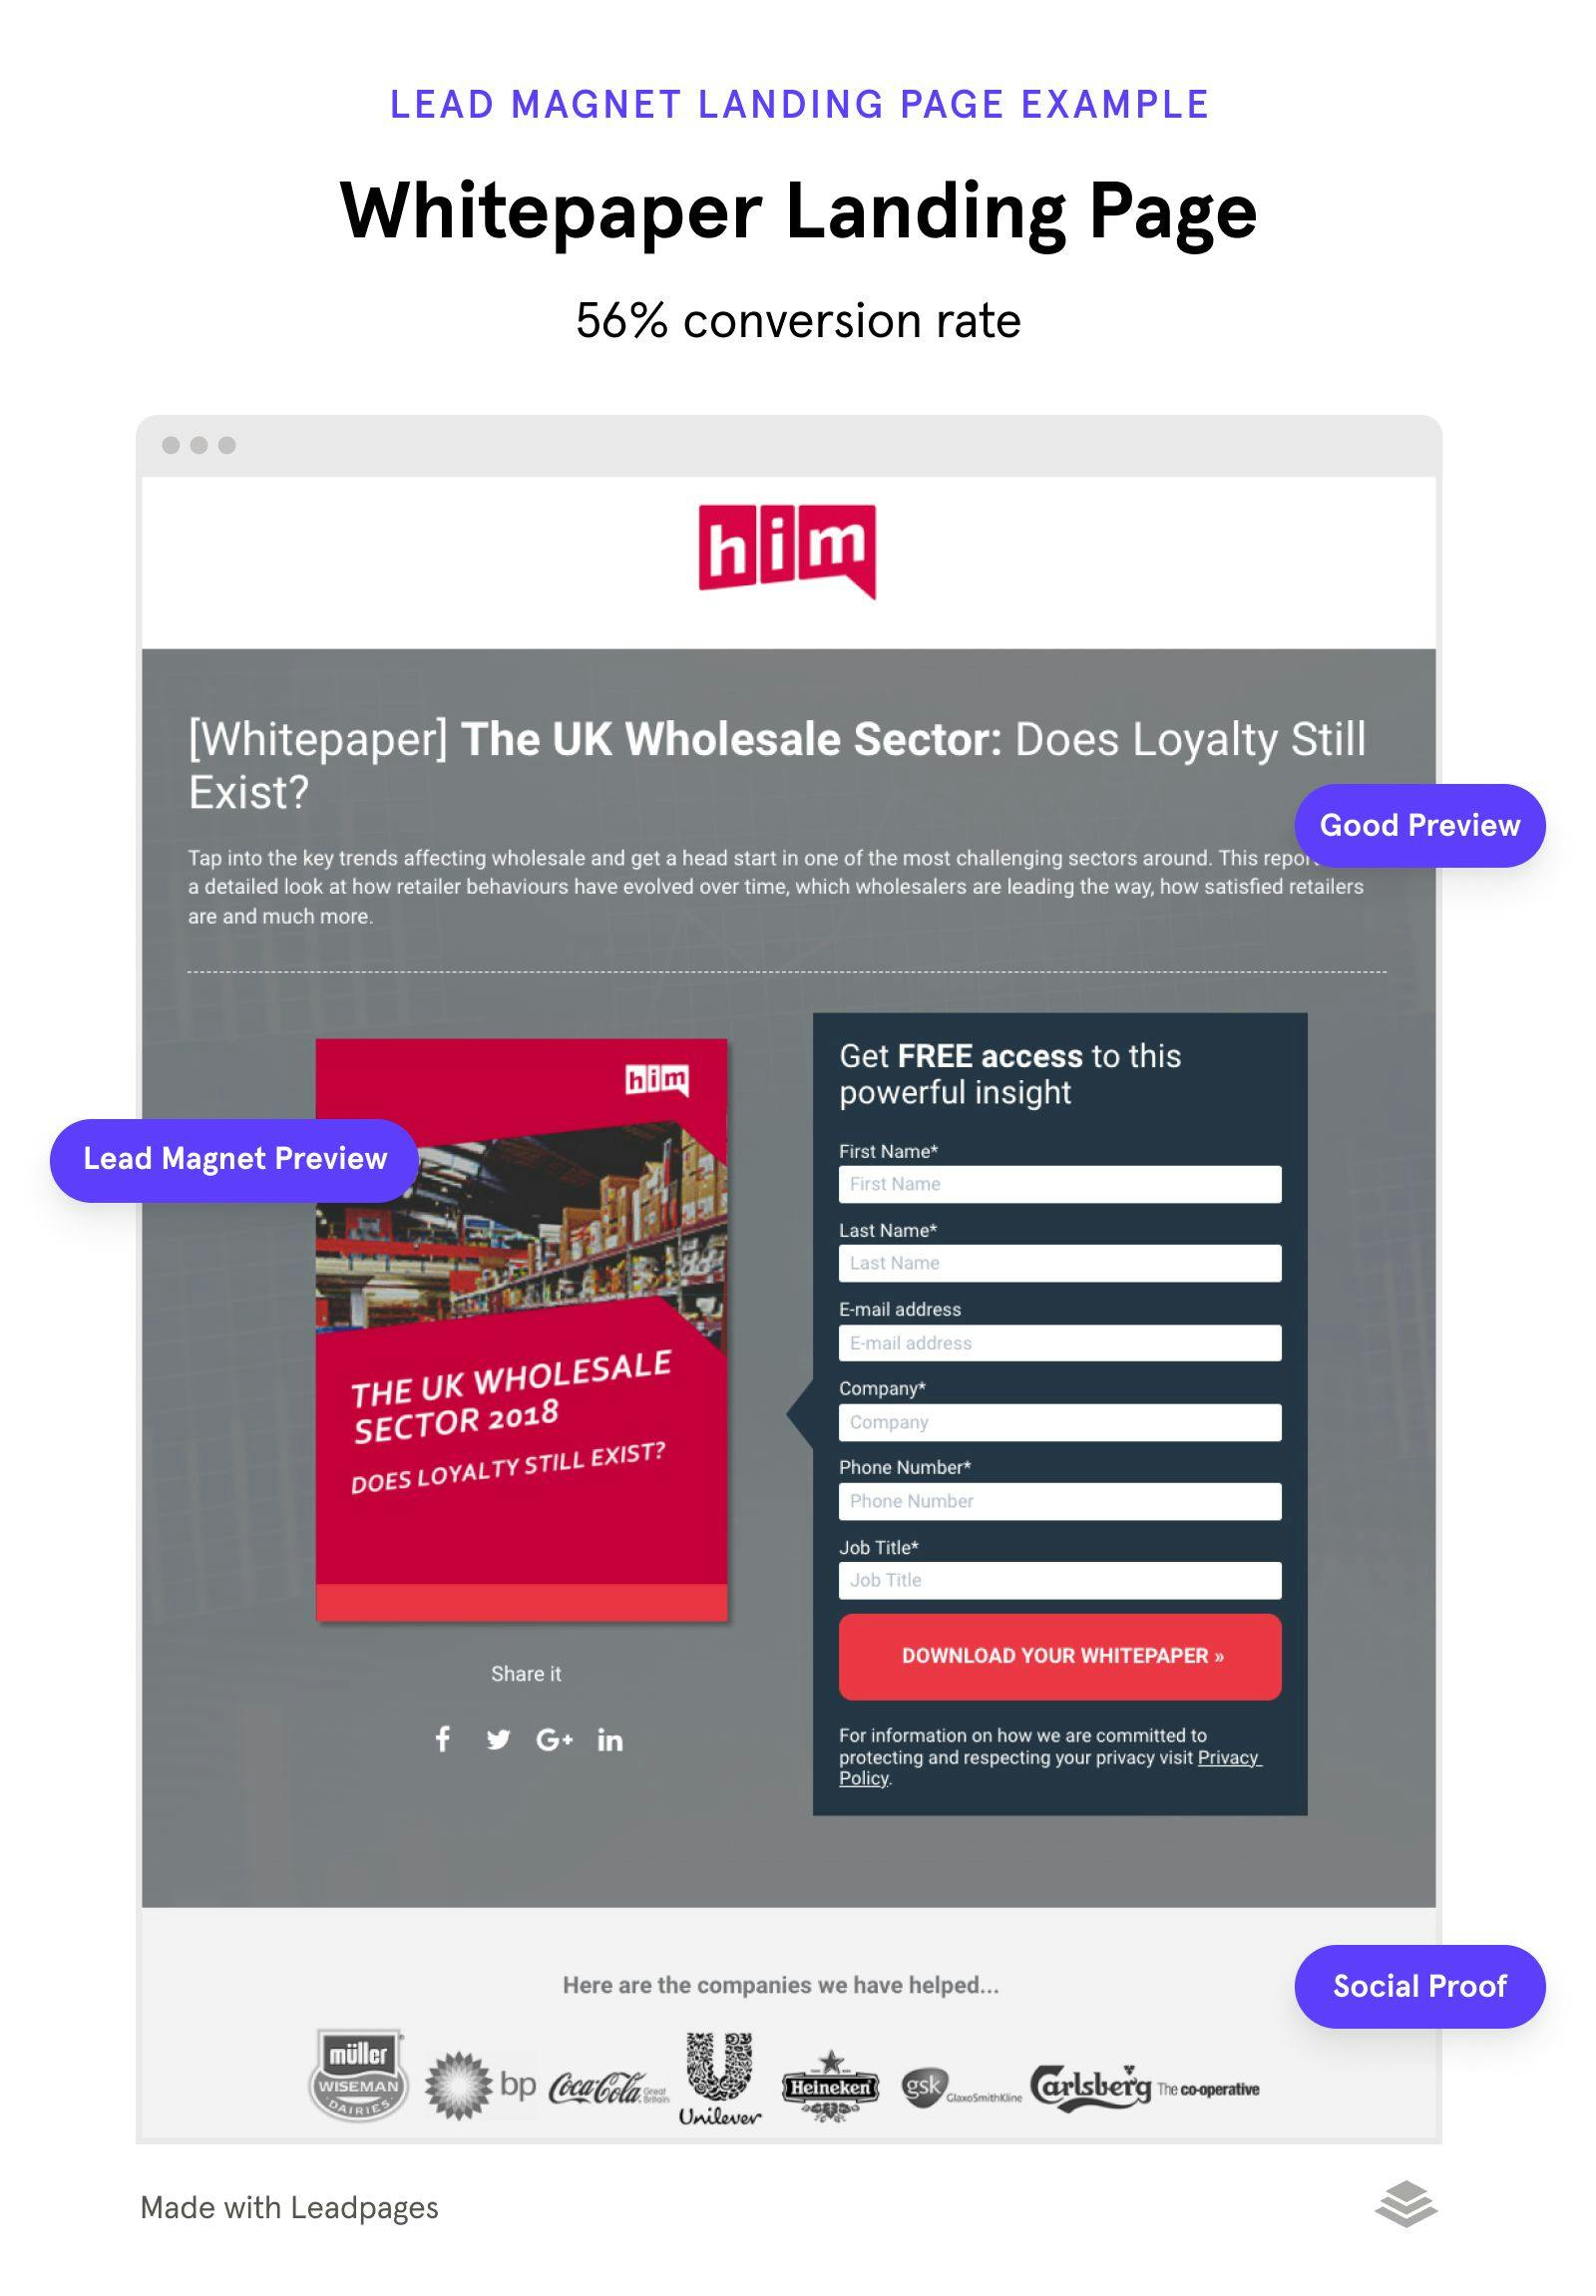 Whitepaper lead magnet landing page example